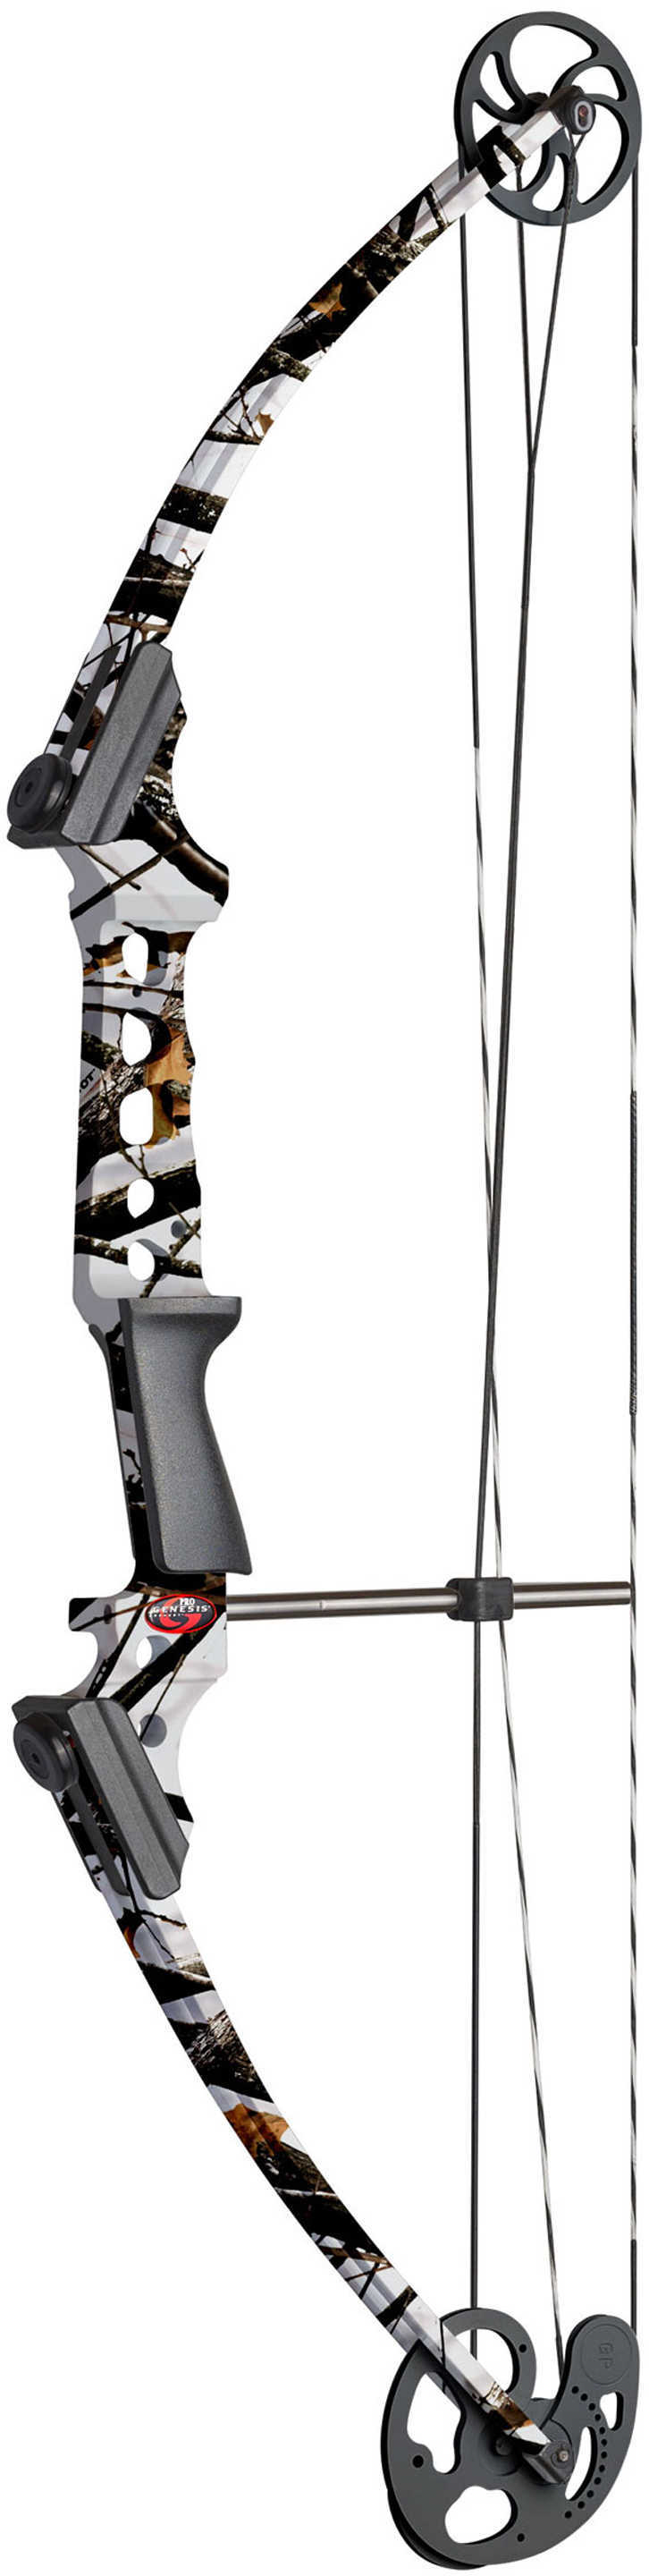 Genesis Pro Bow Right Handed, White Camo Md: 12278